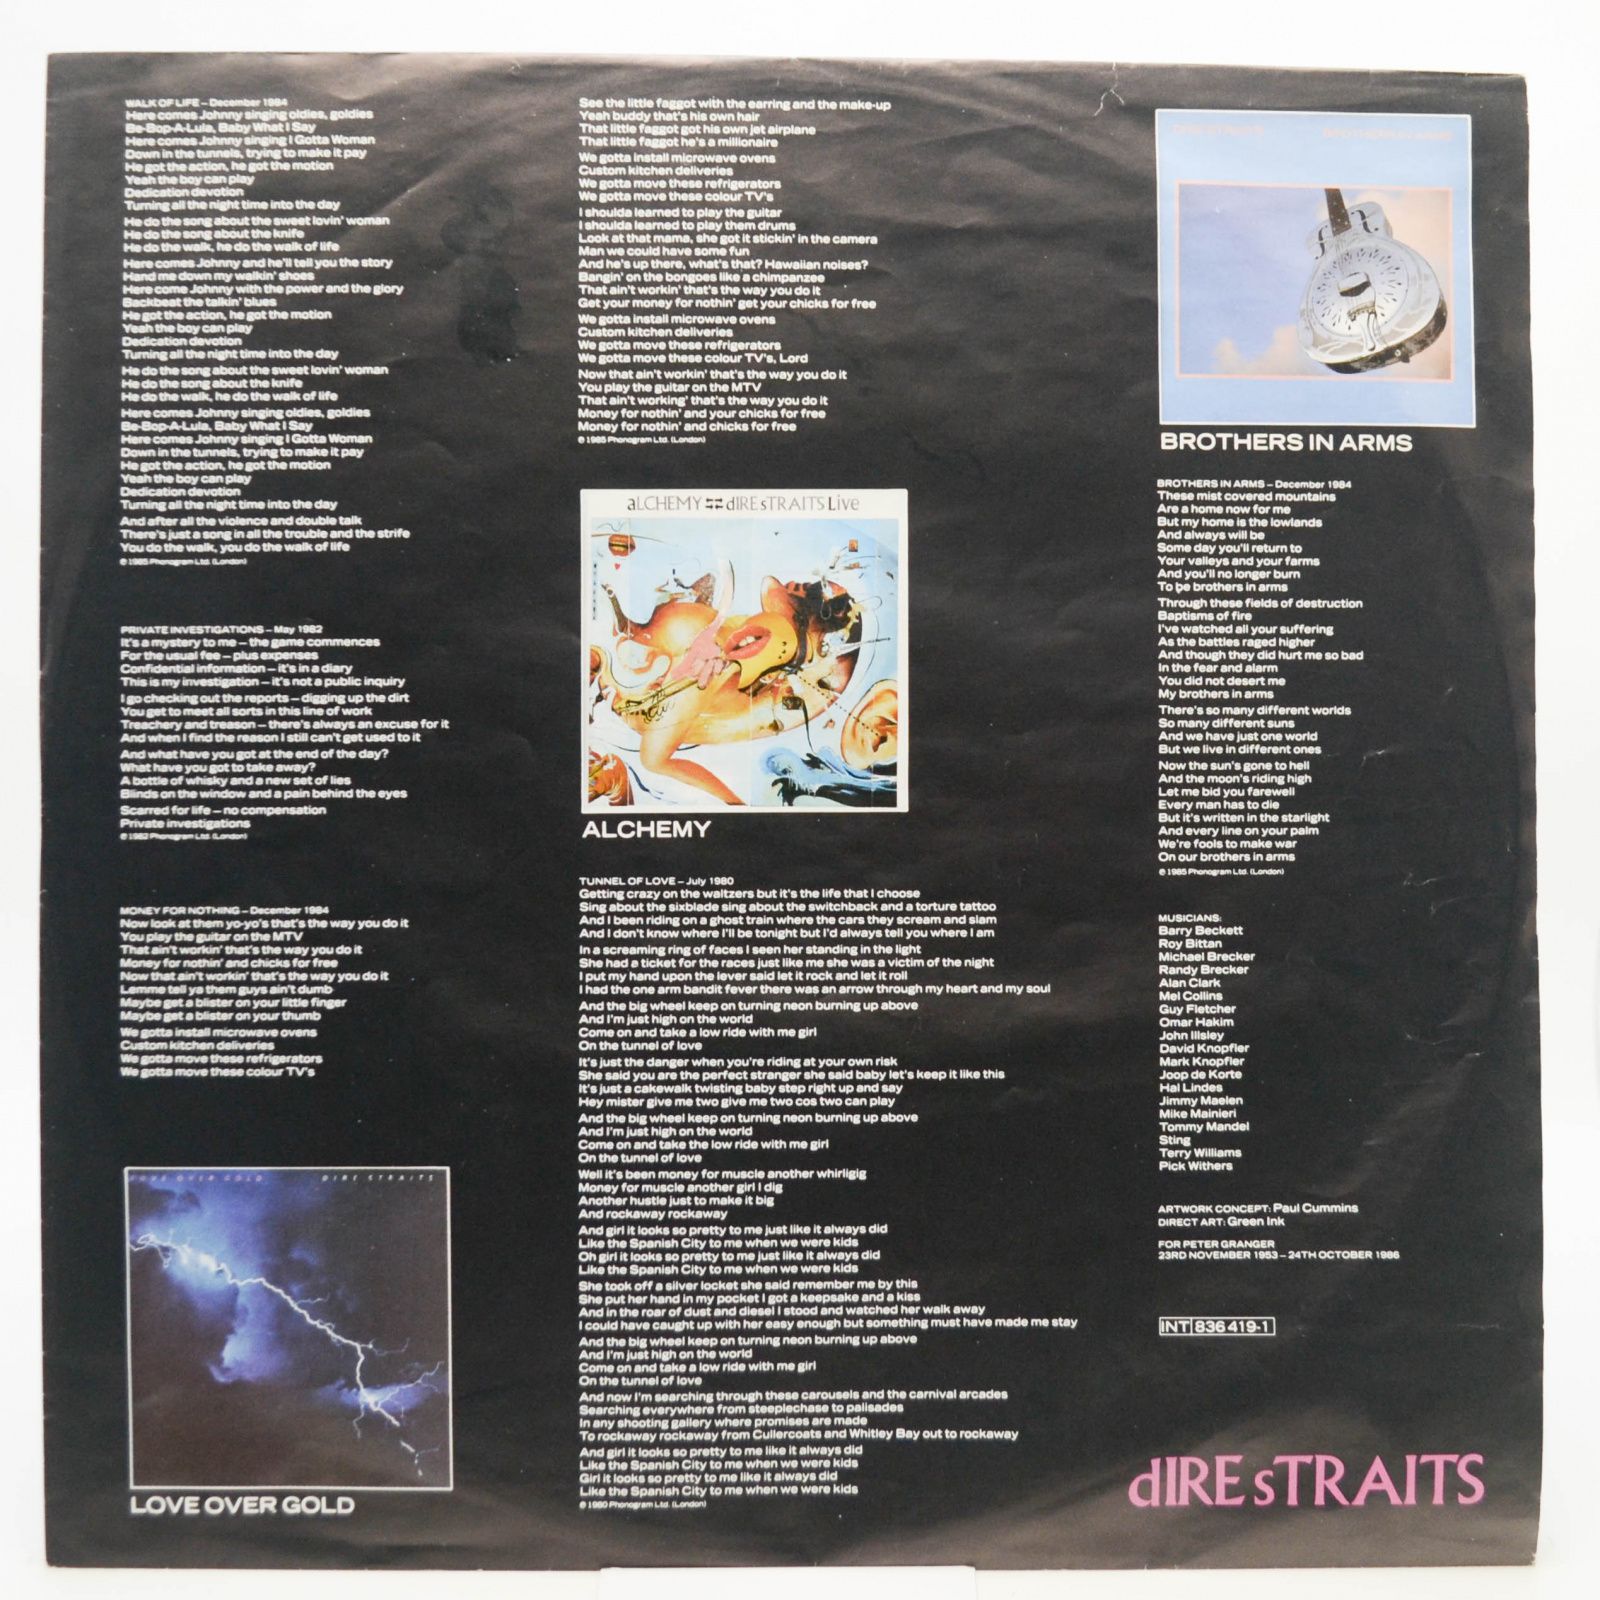 Dire Straits — Money For Nothing, 1988